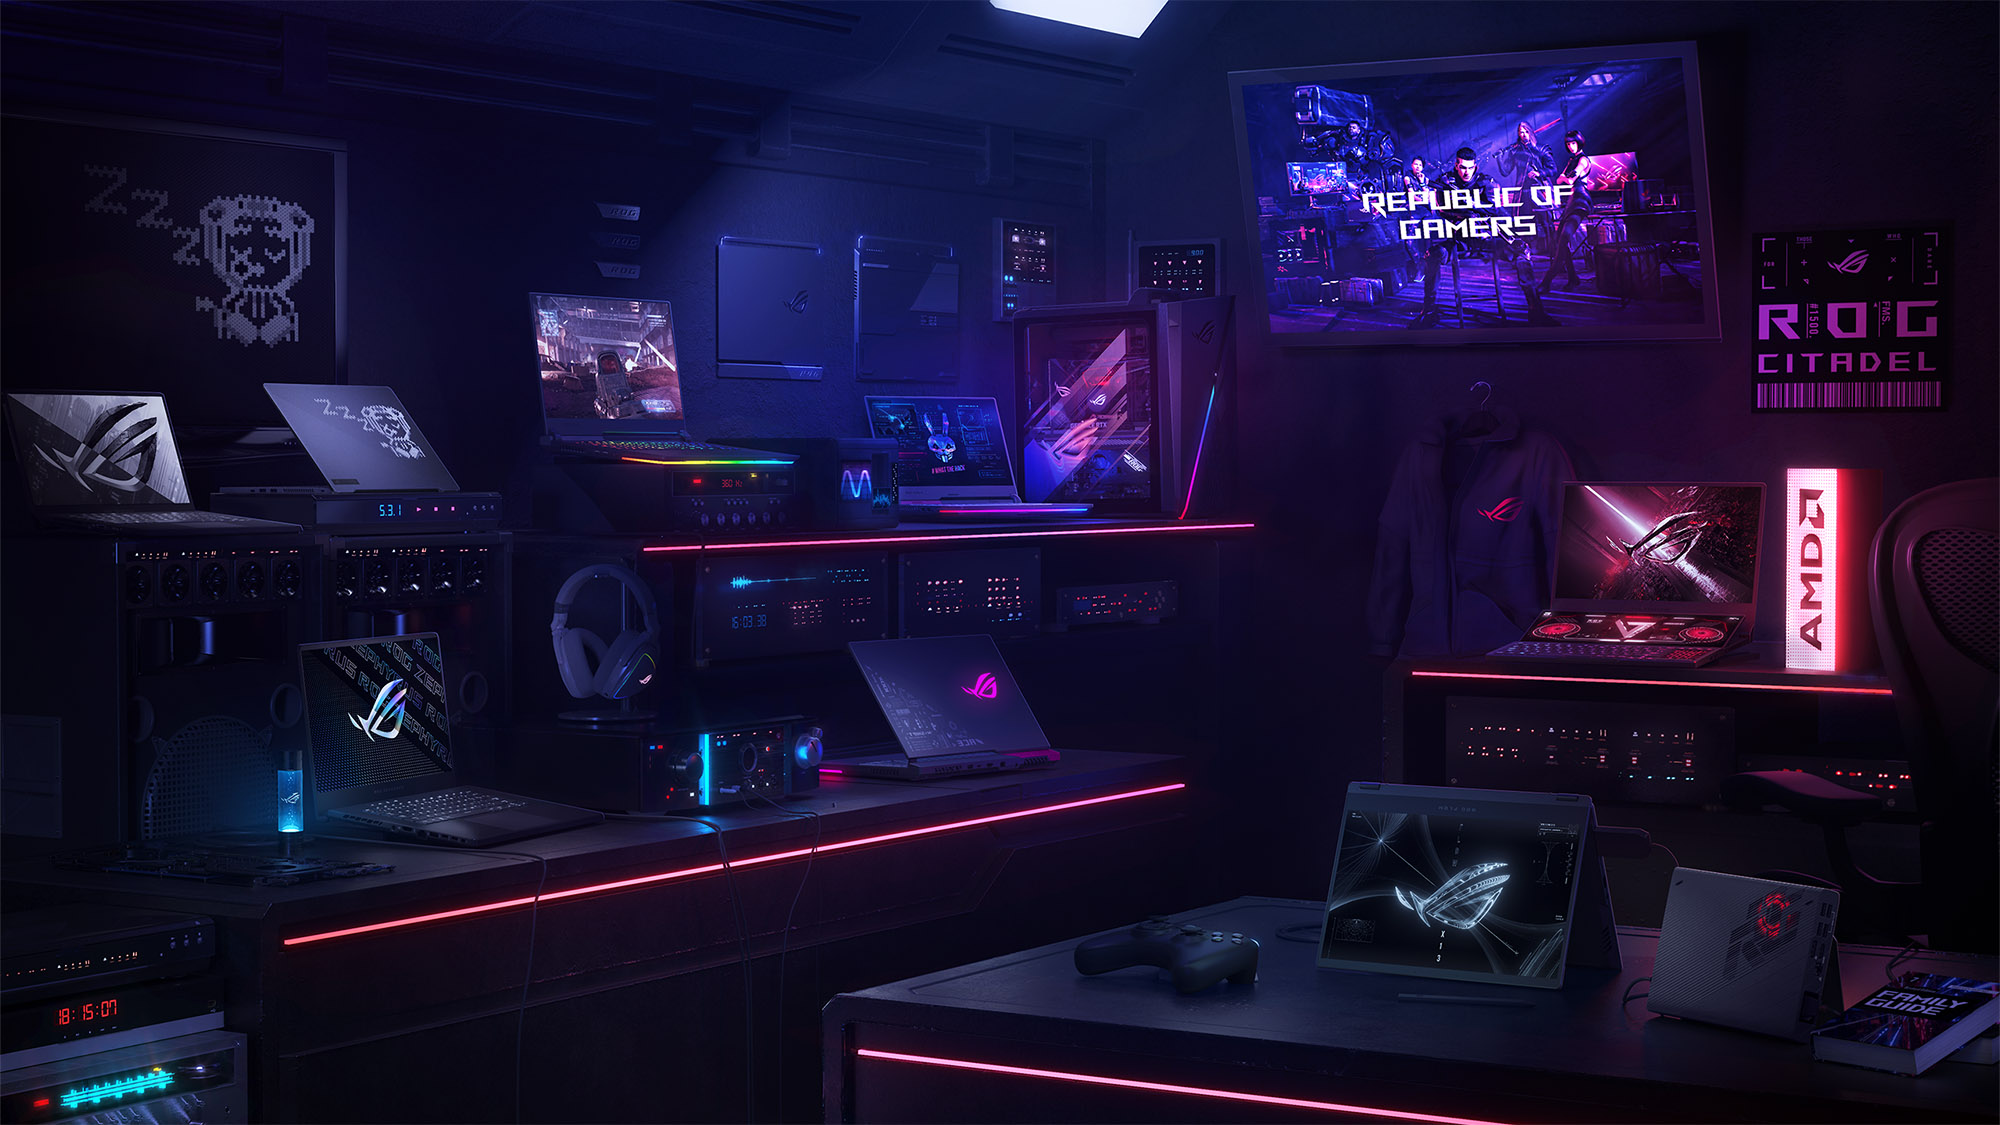 The ROG Swift 500Hz shatters boundaries with its ultra-fast panel